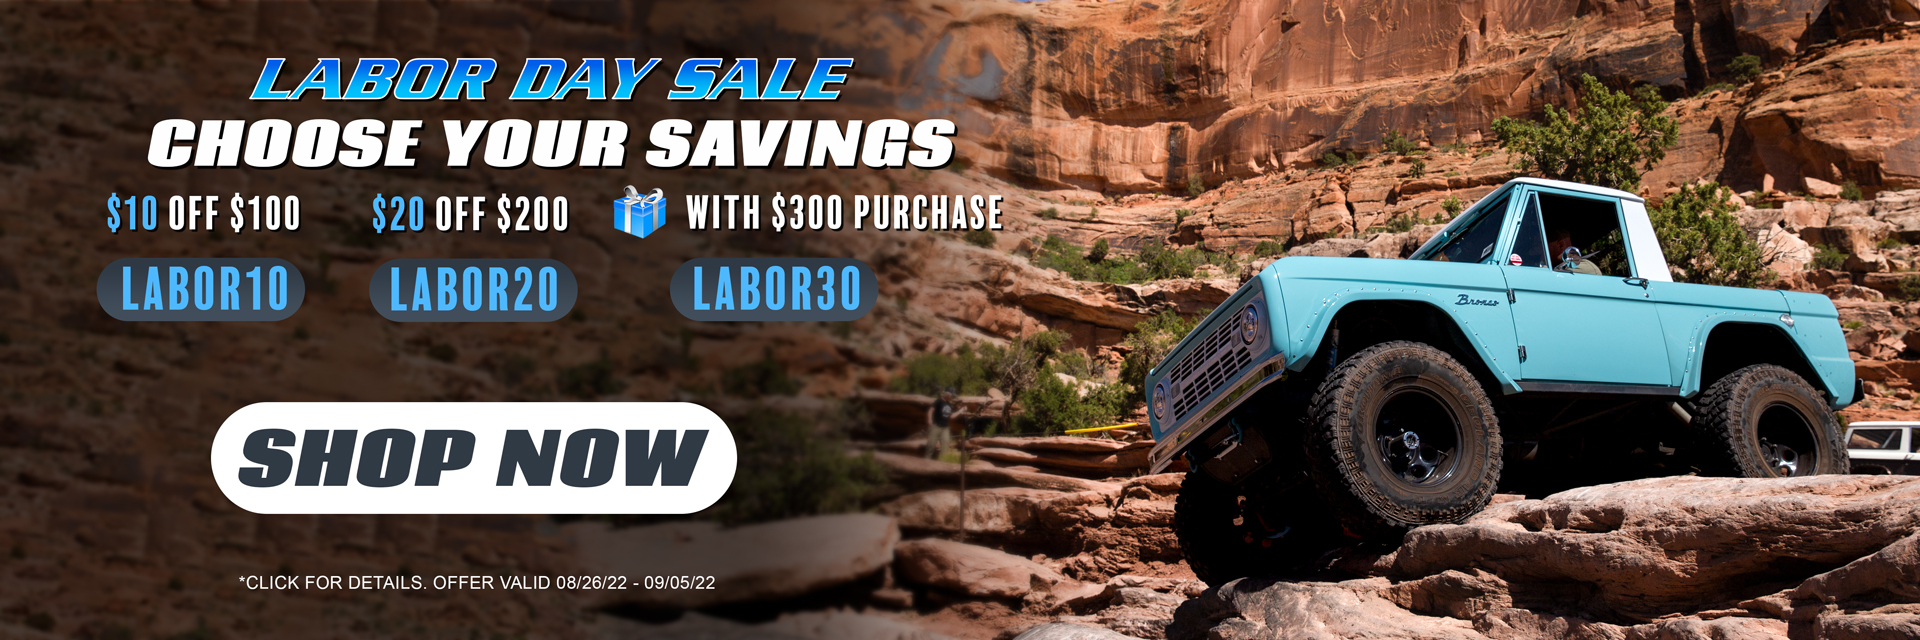 Ford Bronco Wild Horses 4x4 Labor Day Sale Ford_Bronco_Labor_Day_Sale